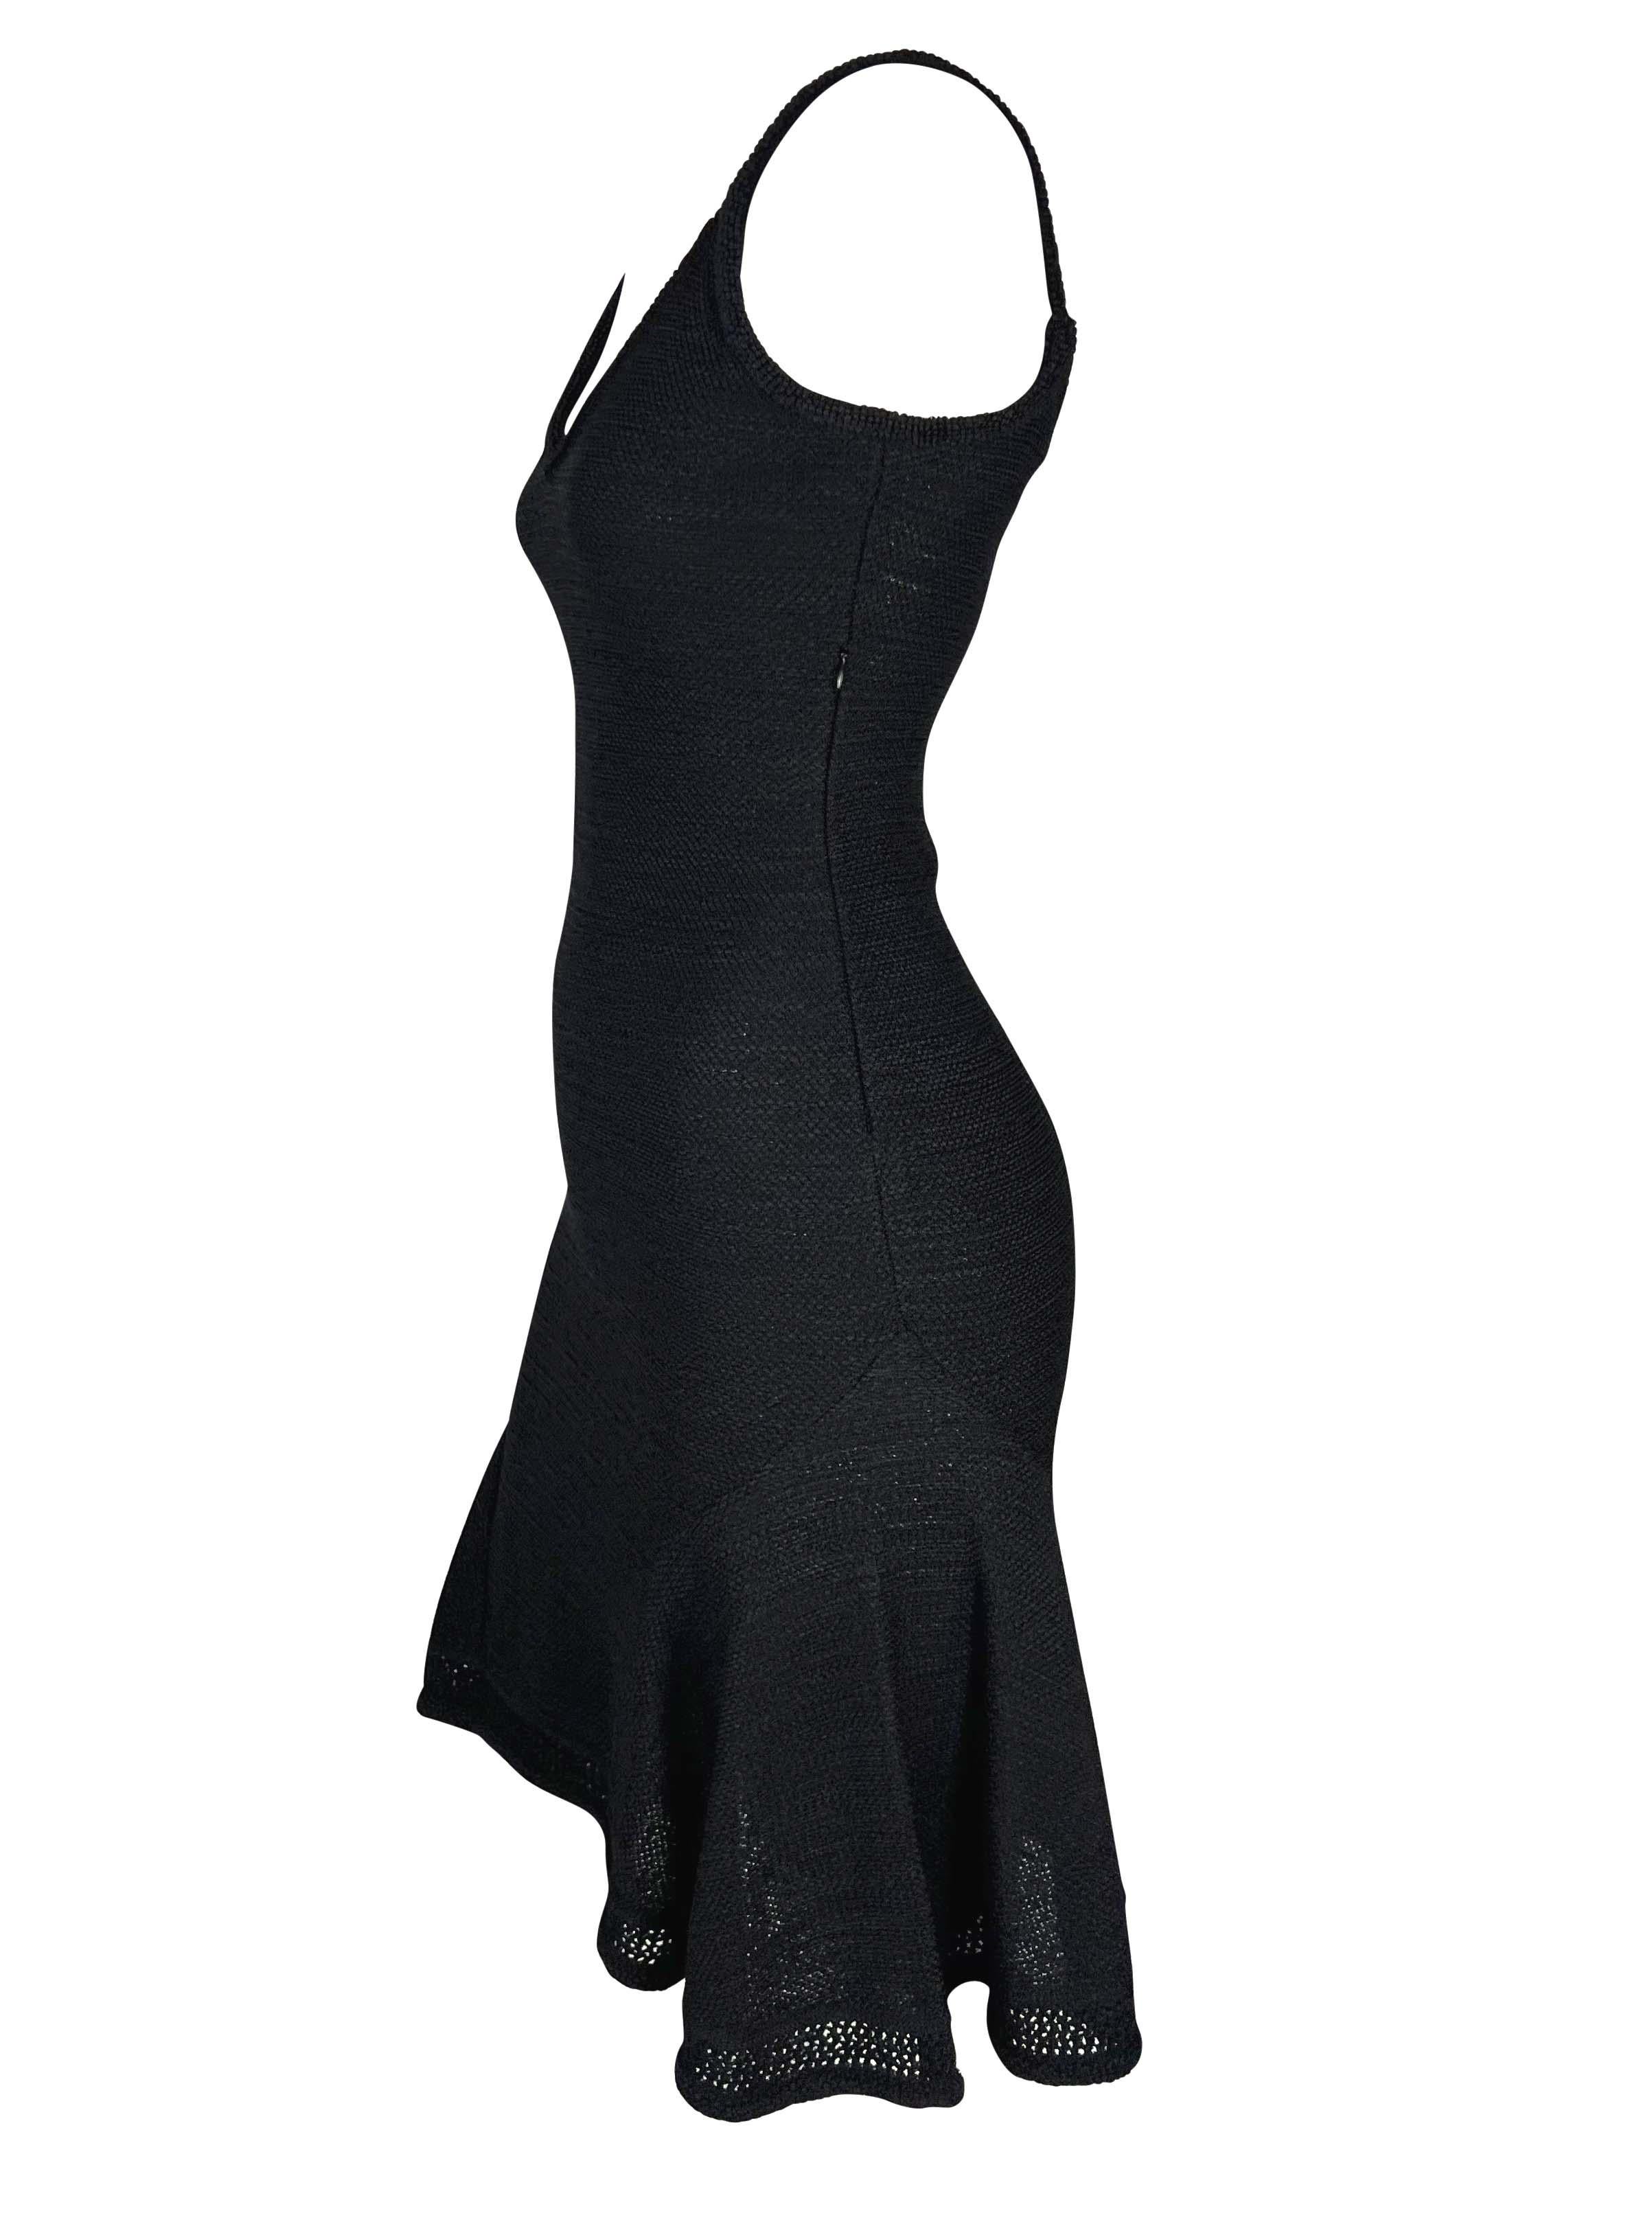 Presenting a black knit John Galliano sweater dress. From the Spring/Summer 1999 